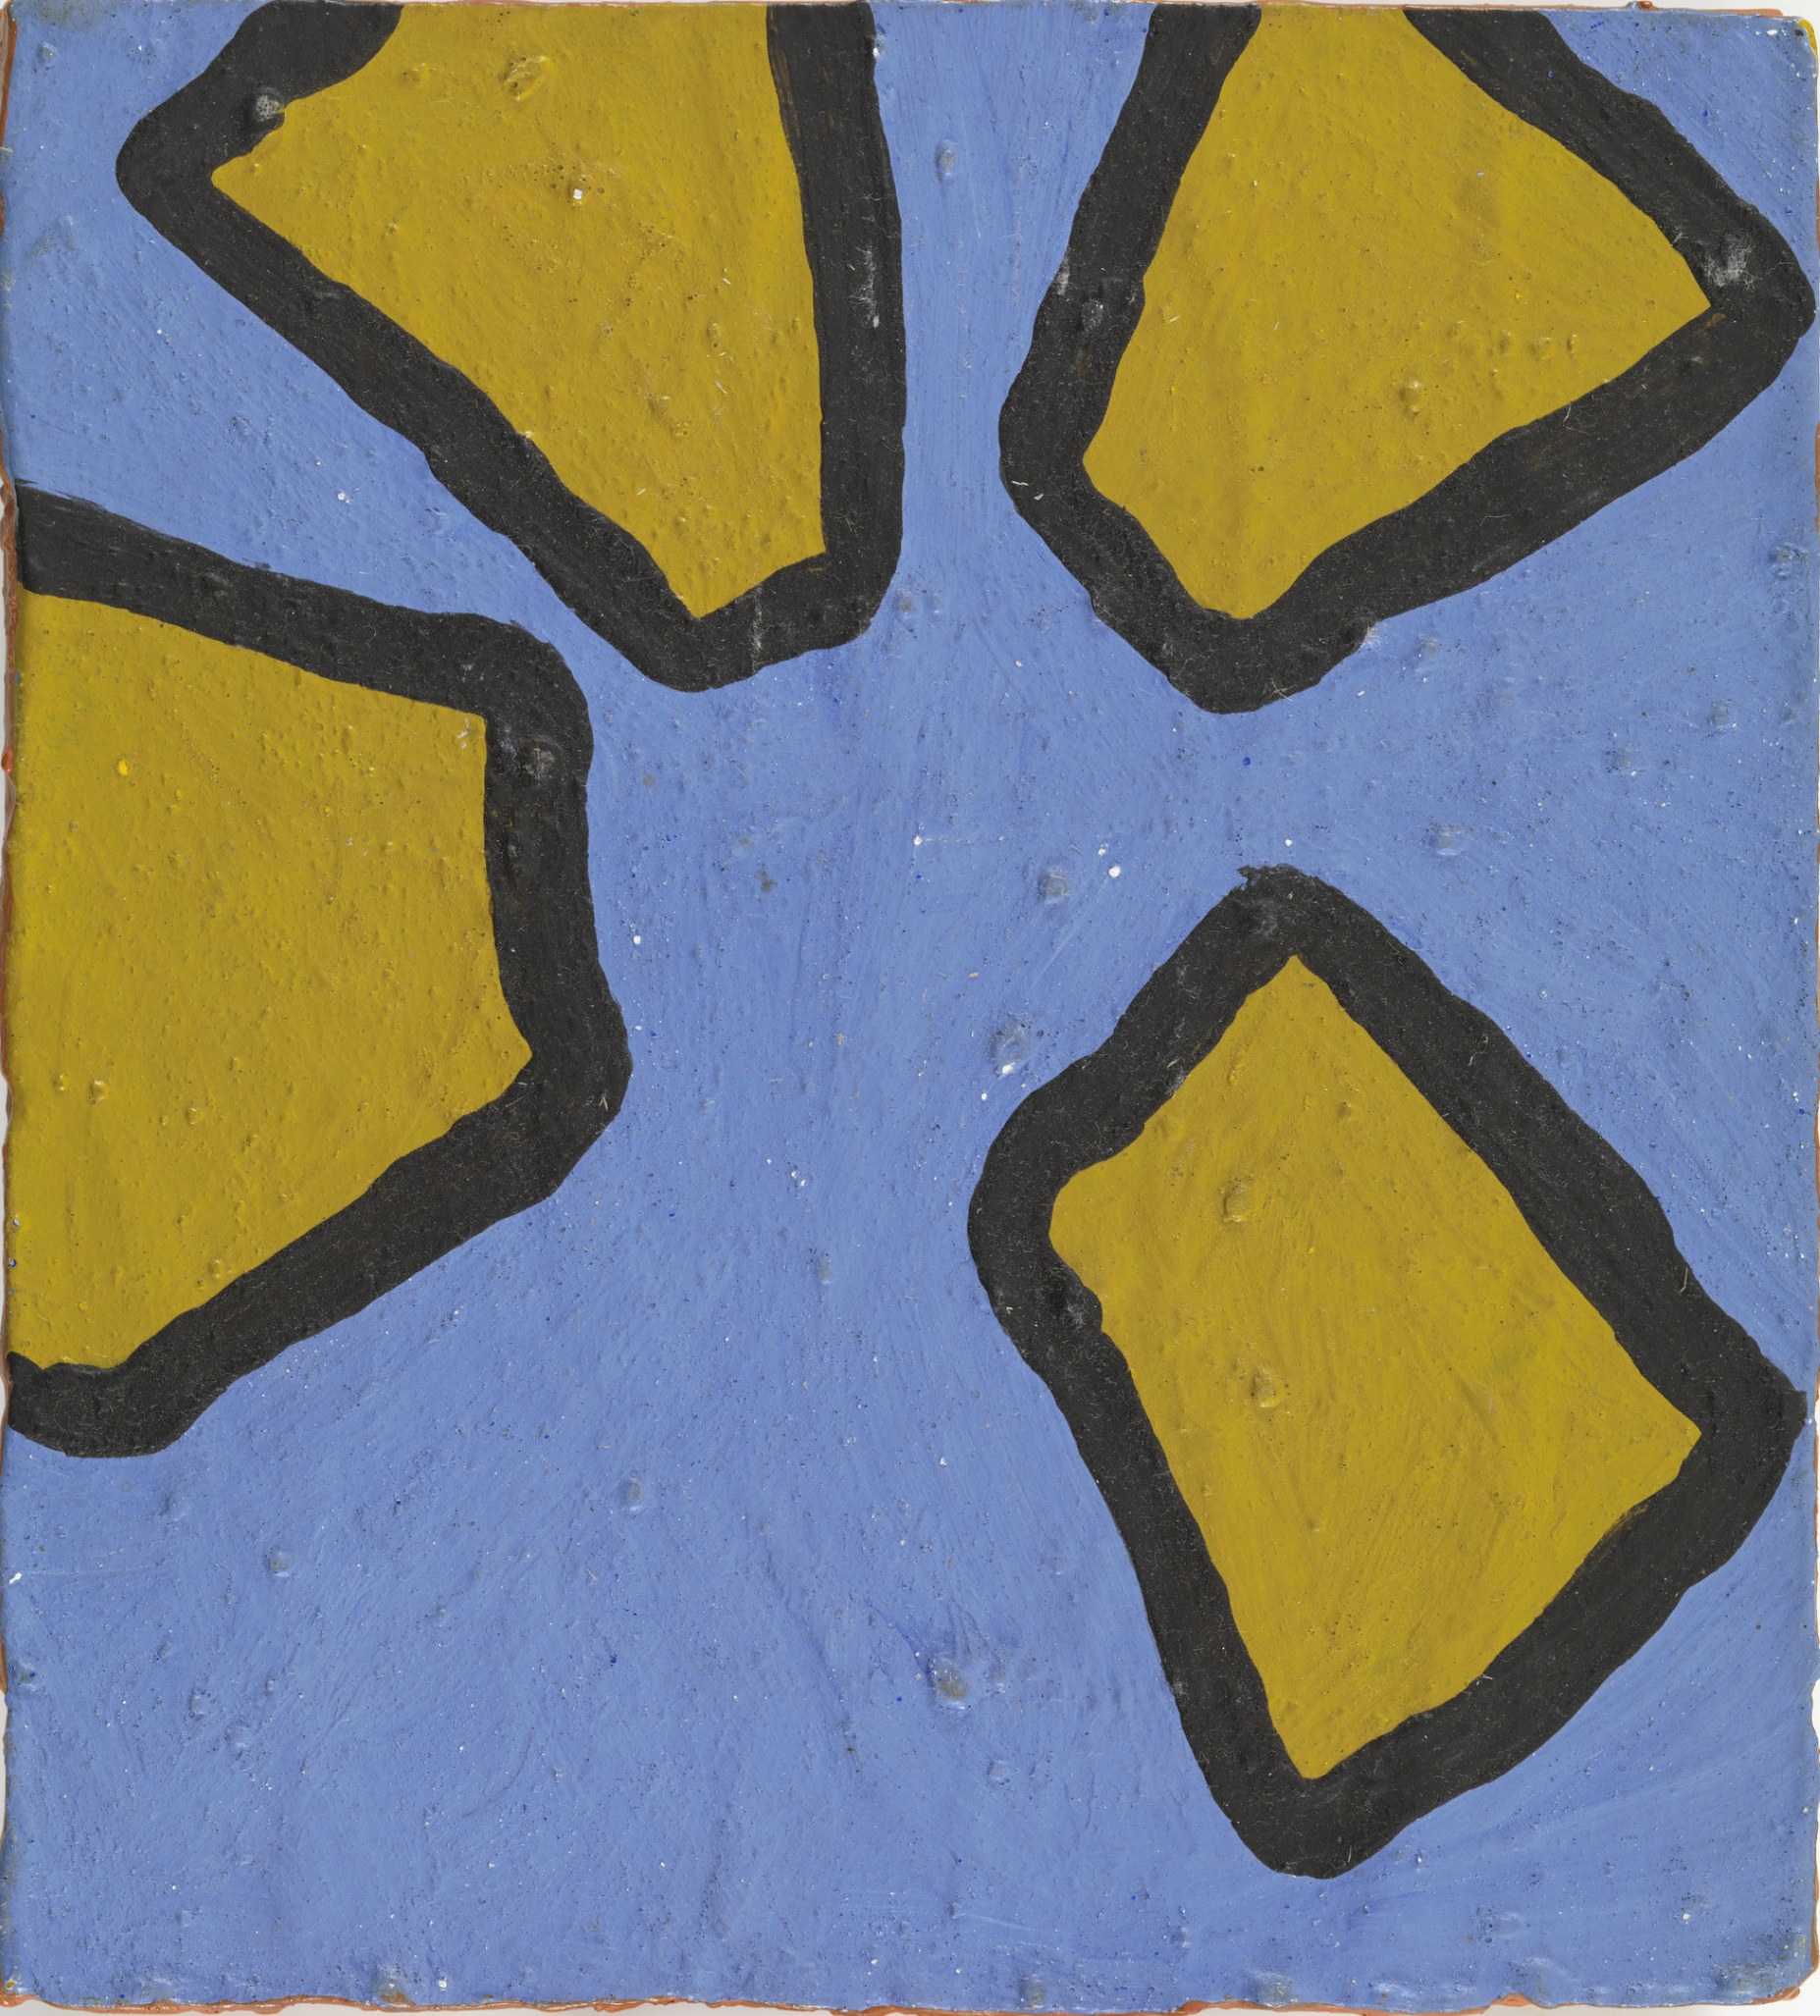 "Yellow Wheel with Orange Border" by Lawrence Weiner, 1963, an abstract painting with yellow geometric shapes outlined in black, arranged in a radiating composition against a blue background with an orange border.